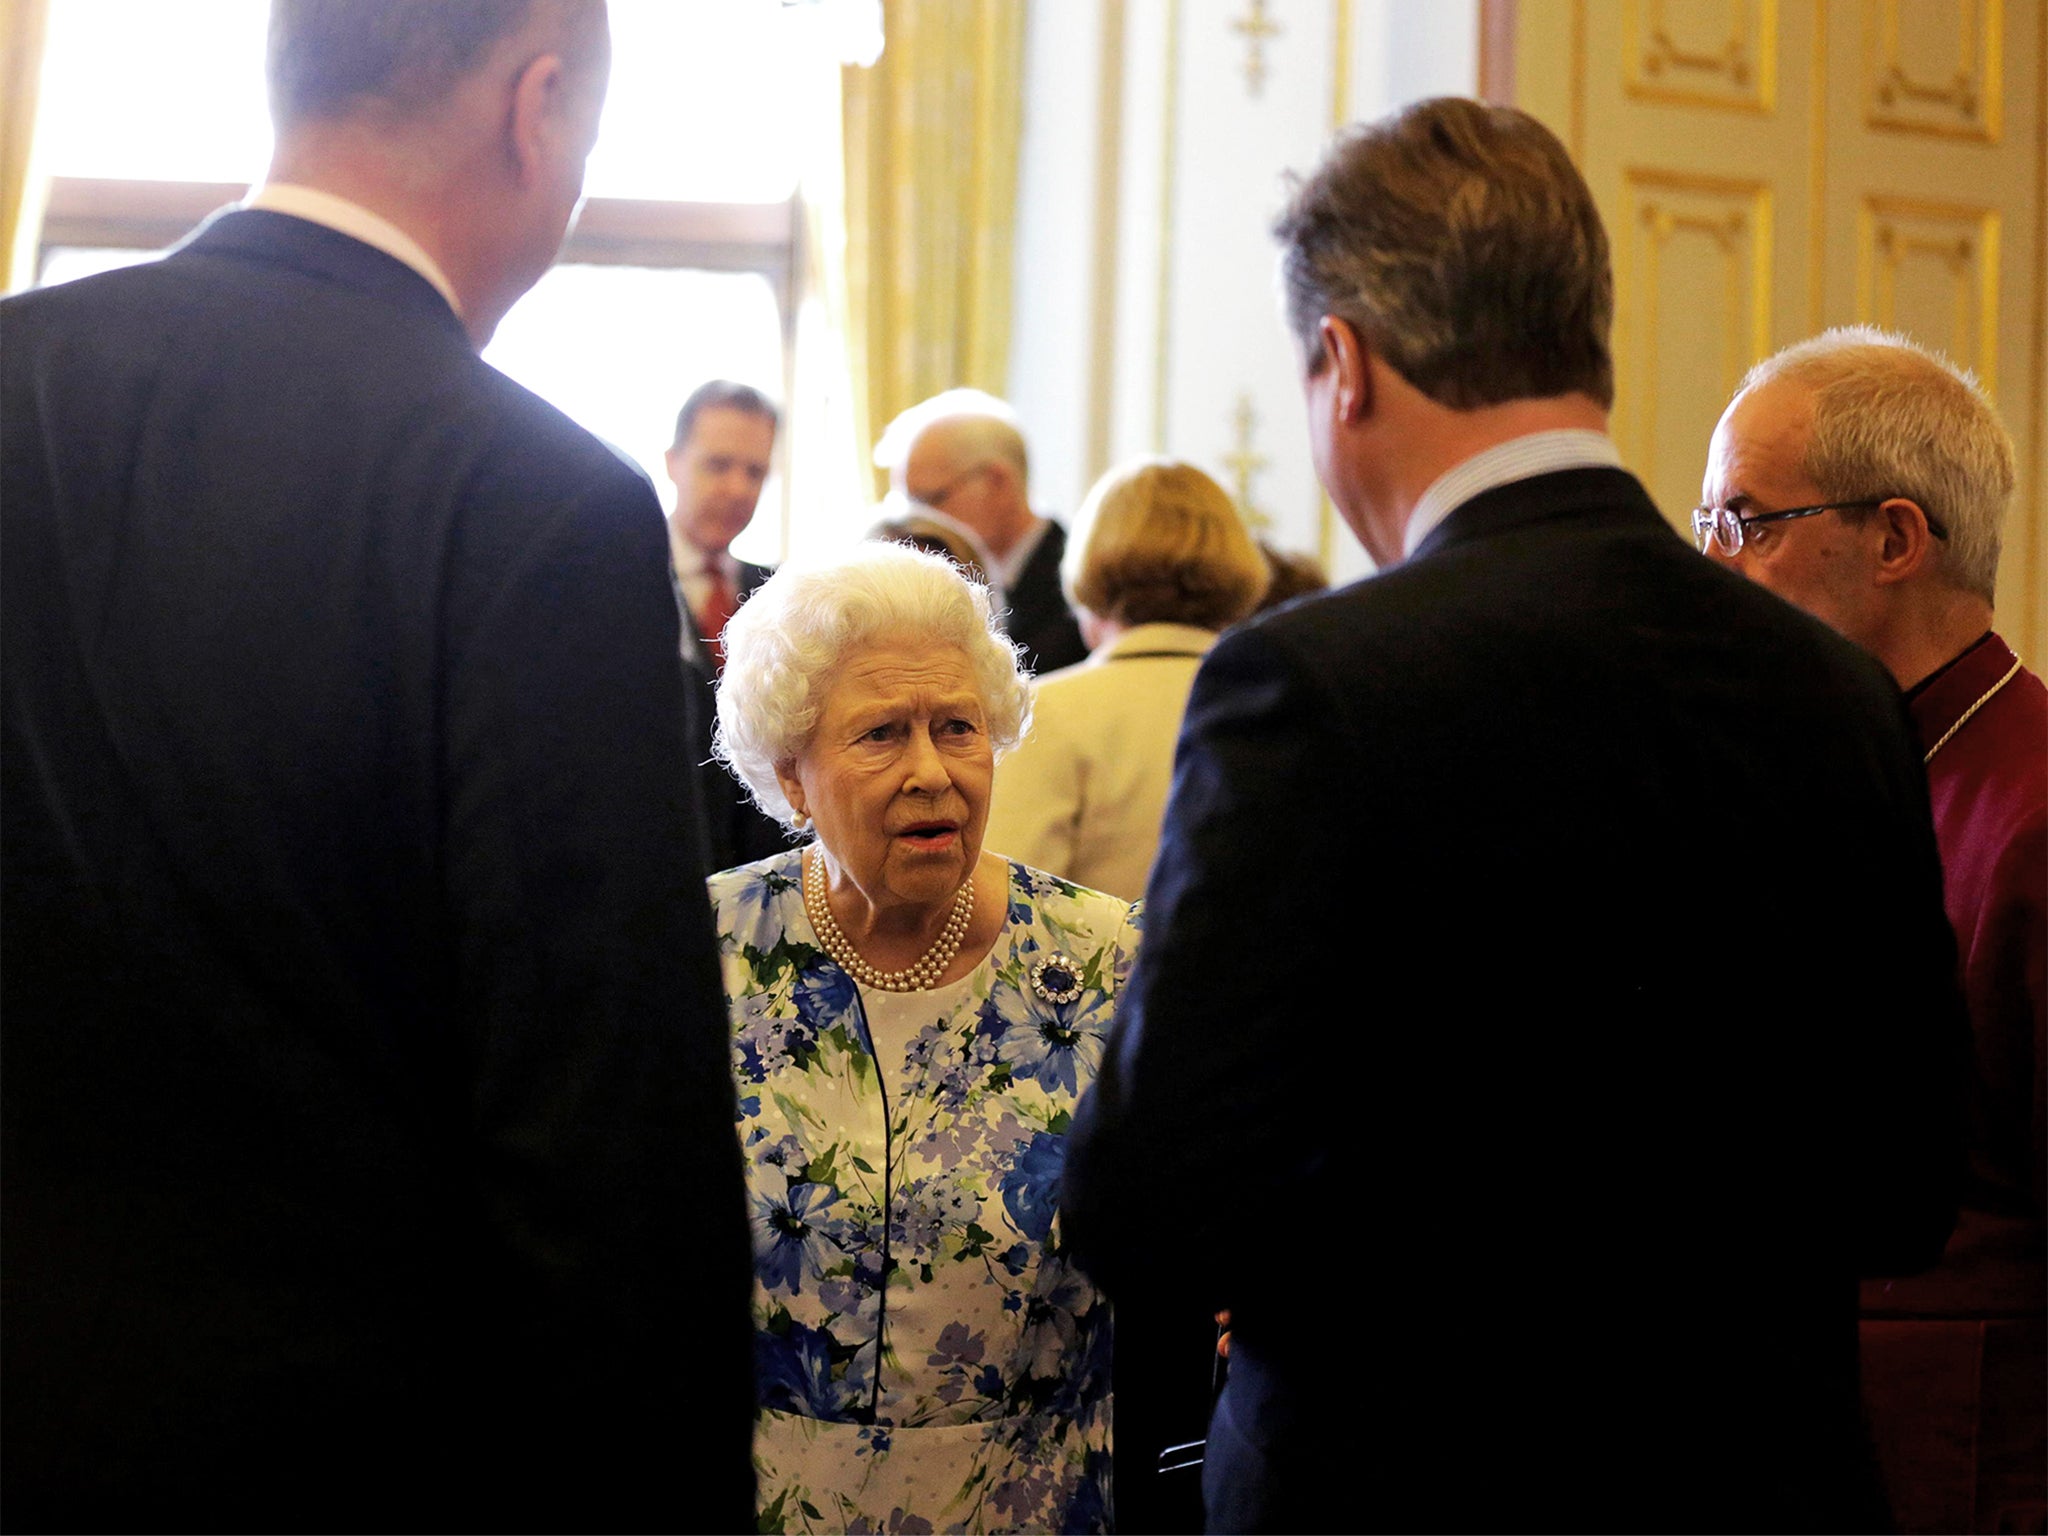 The Queen in conversation with the Prime Minister yesterday